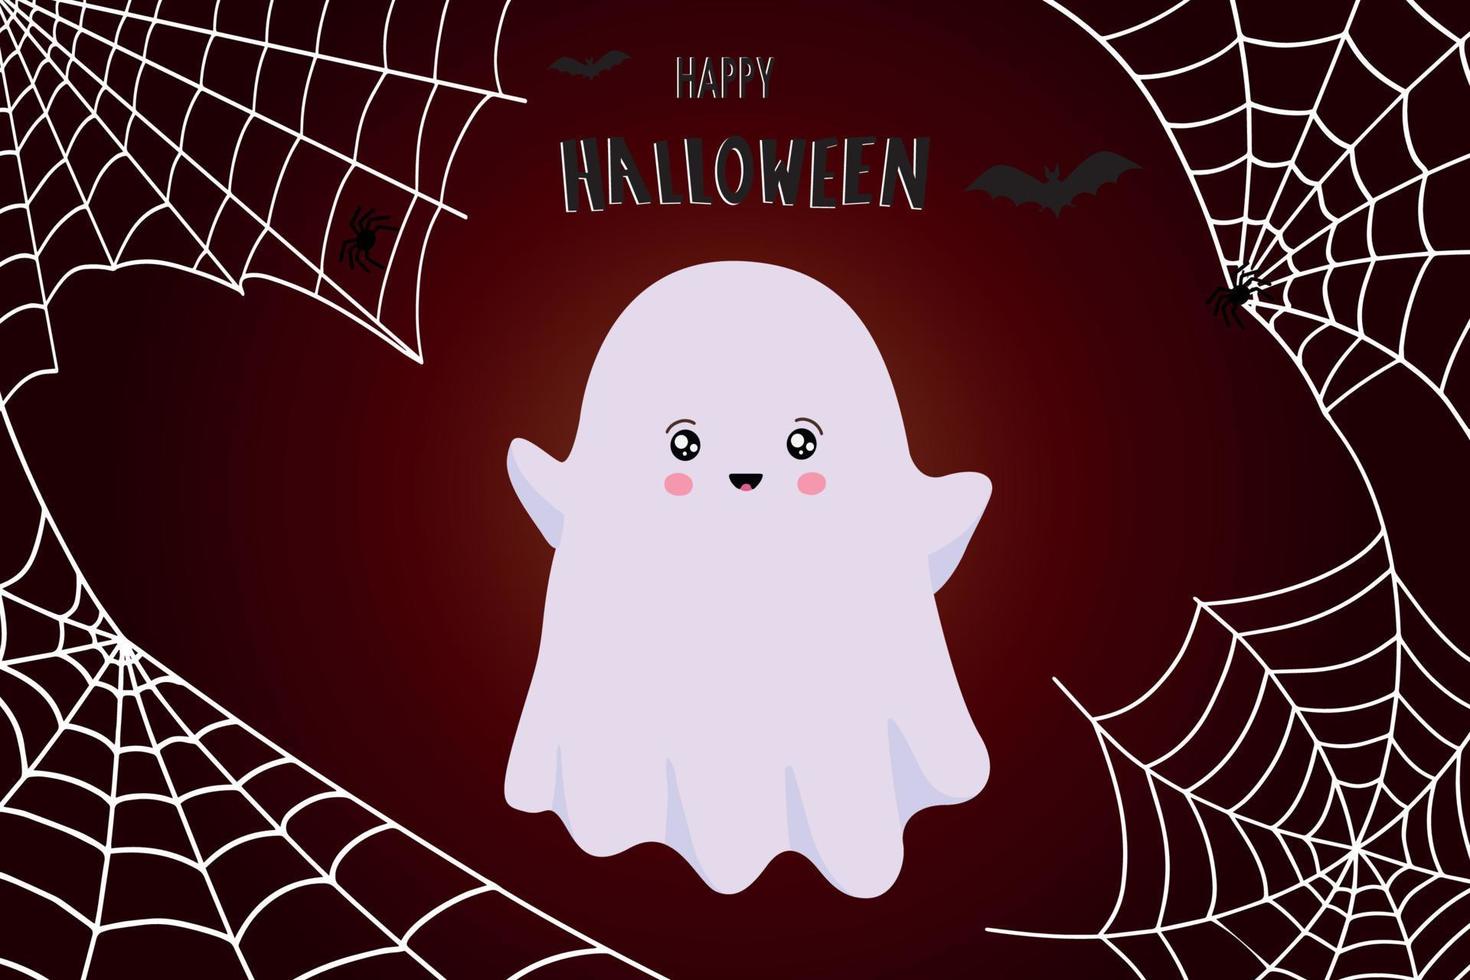 Flying ghost ghost Boo. Happy Halloween. The white ghost. Flat design. Vector illustration.